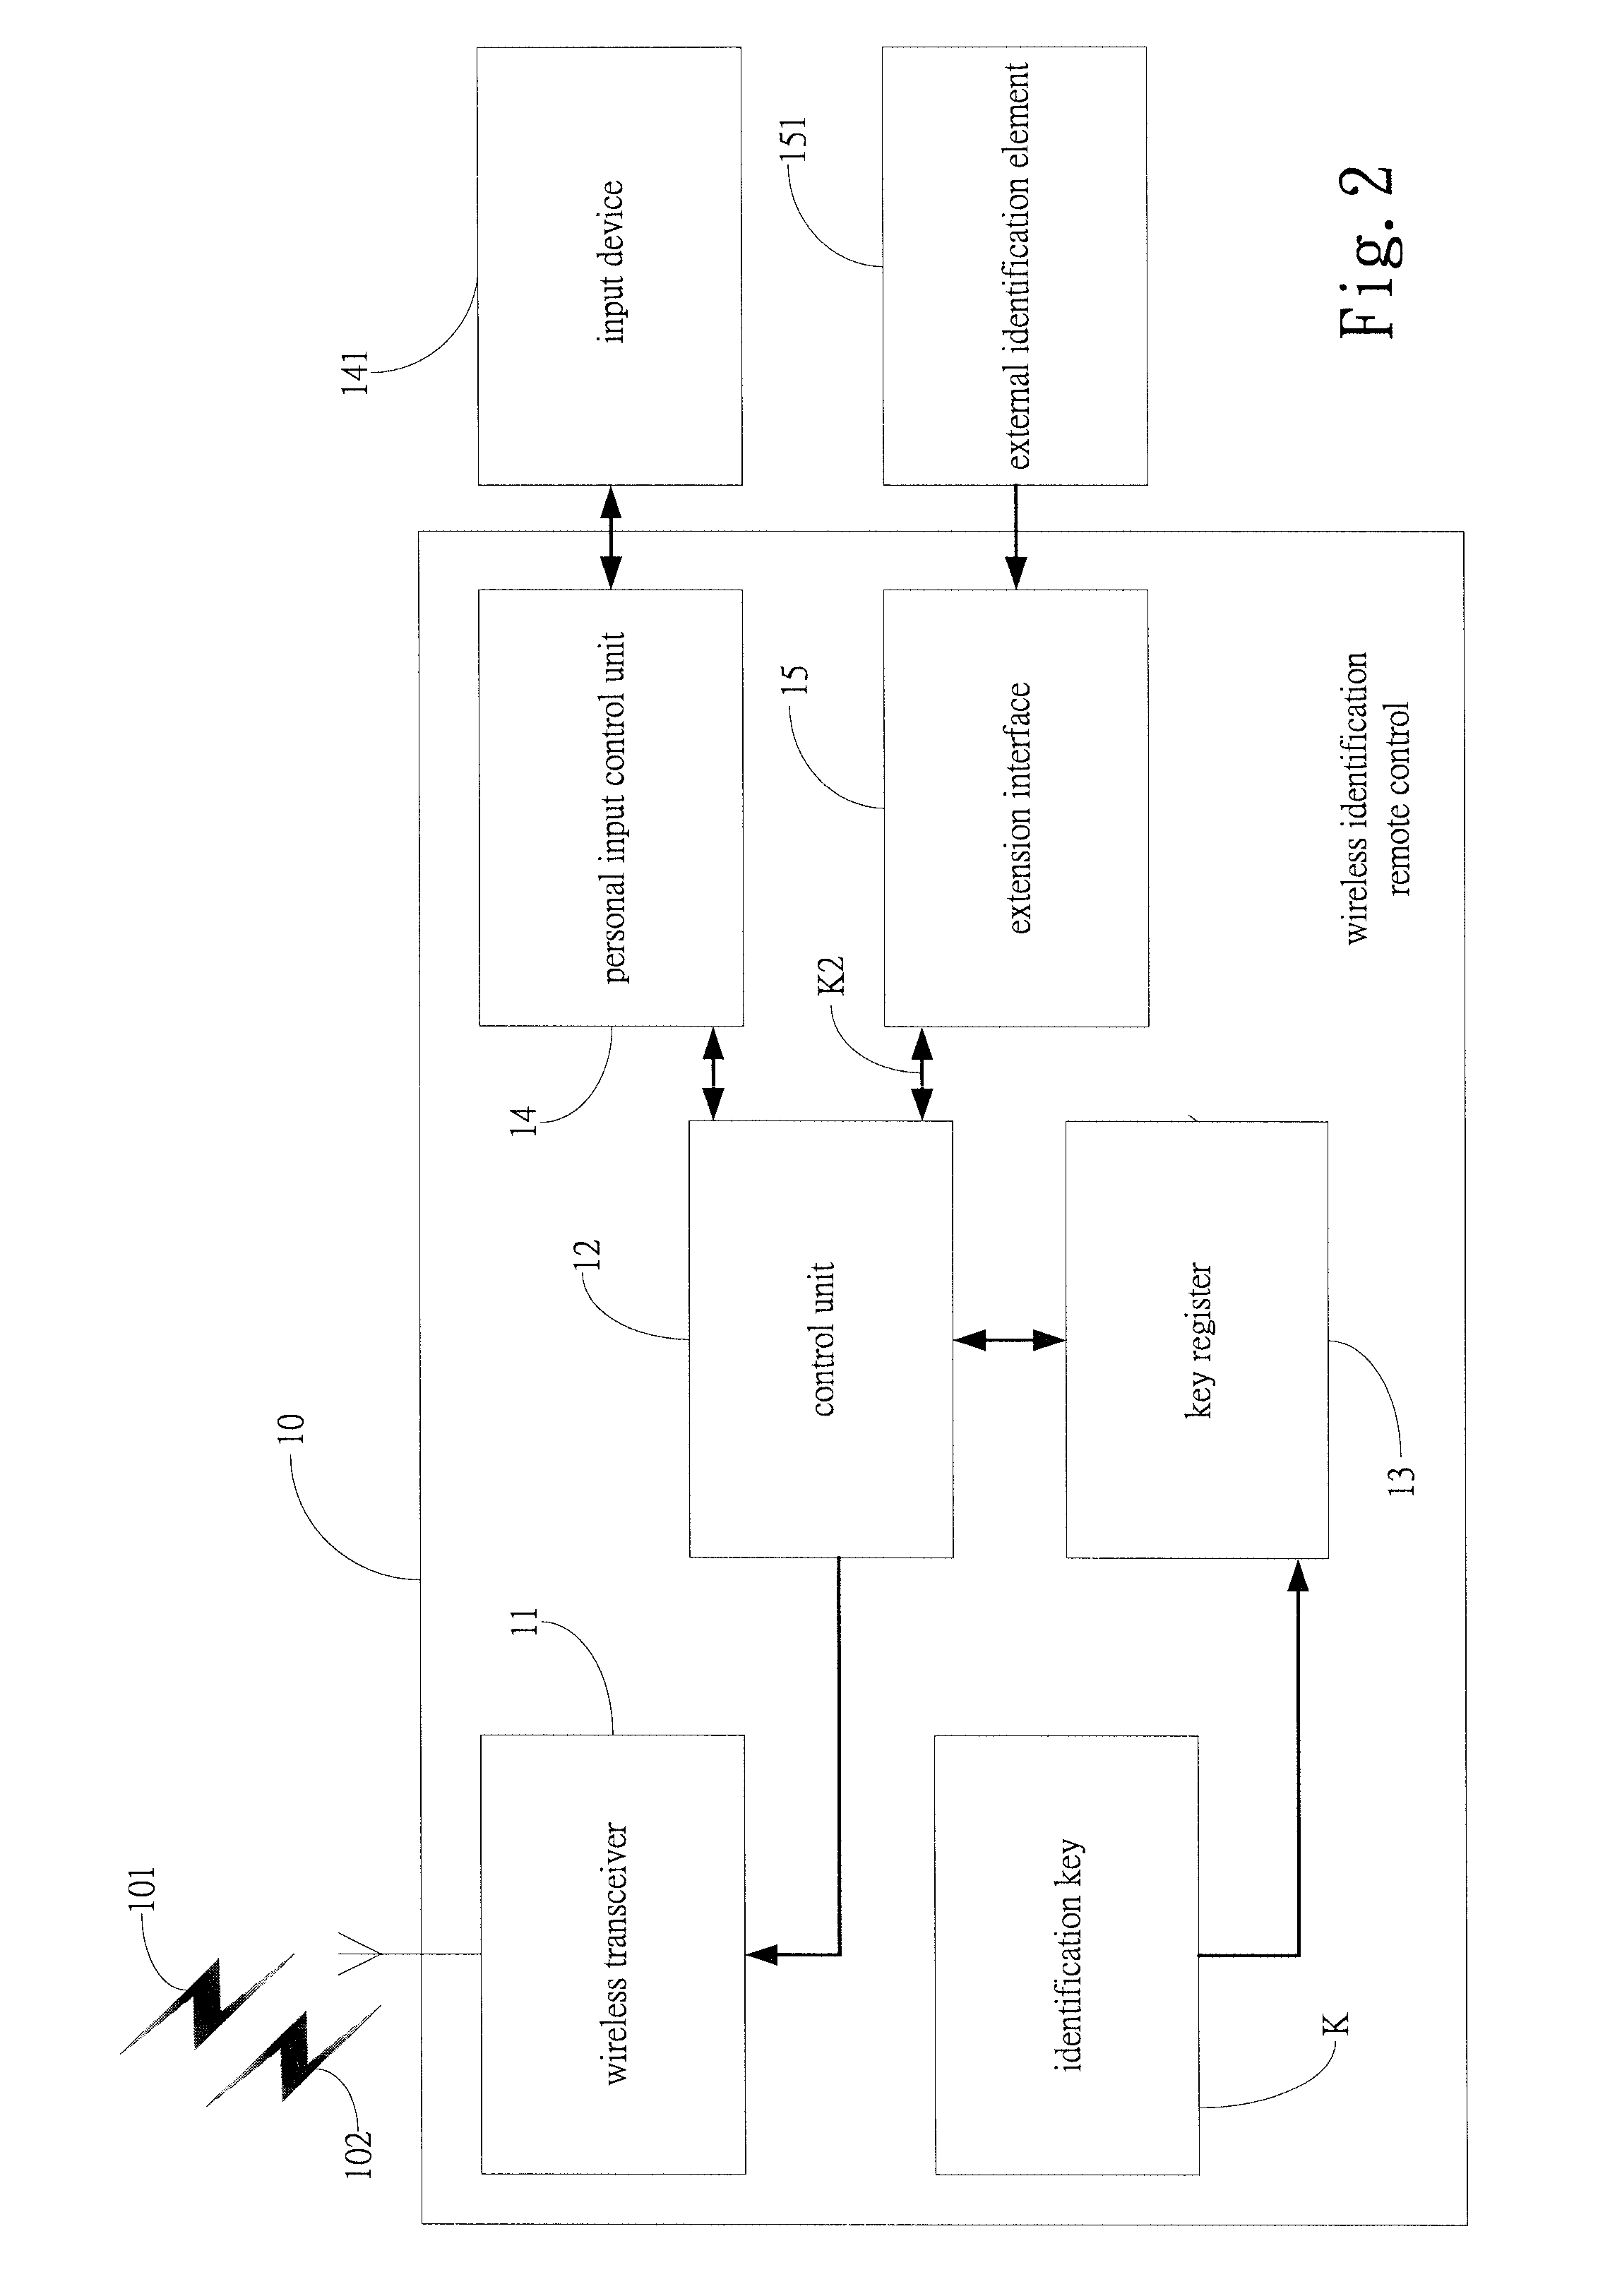 Portable storage device with wireless encryption protection